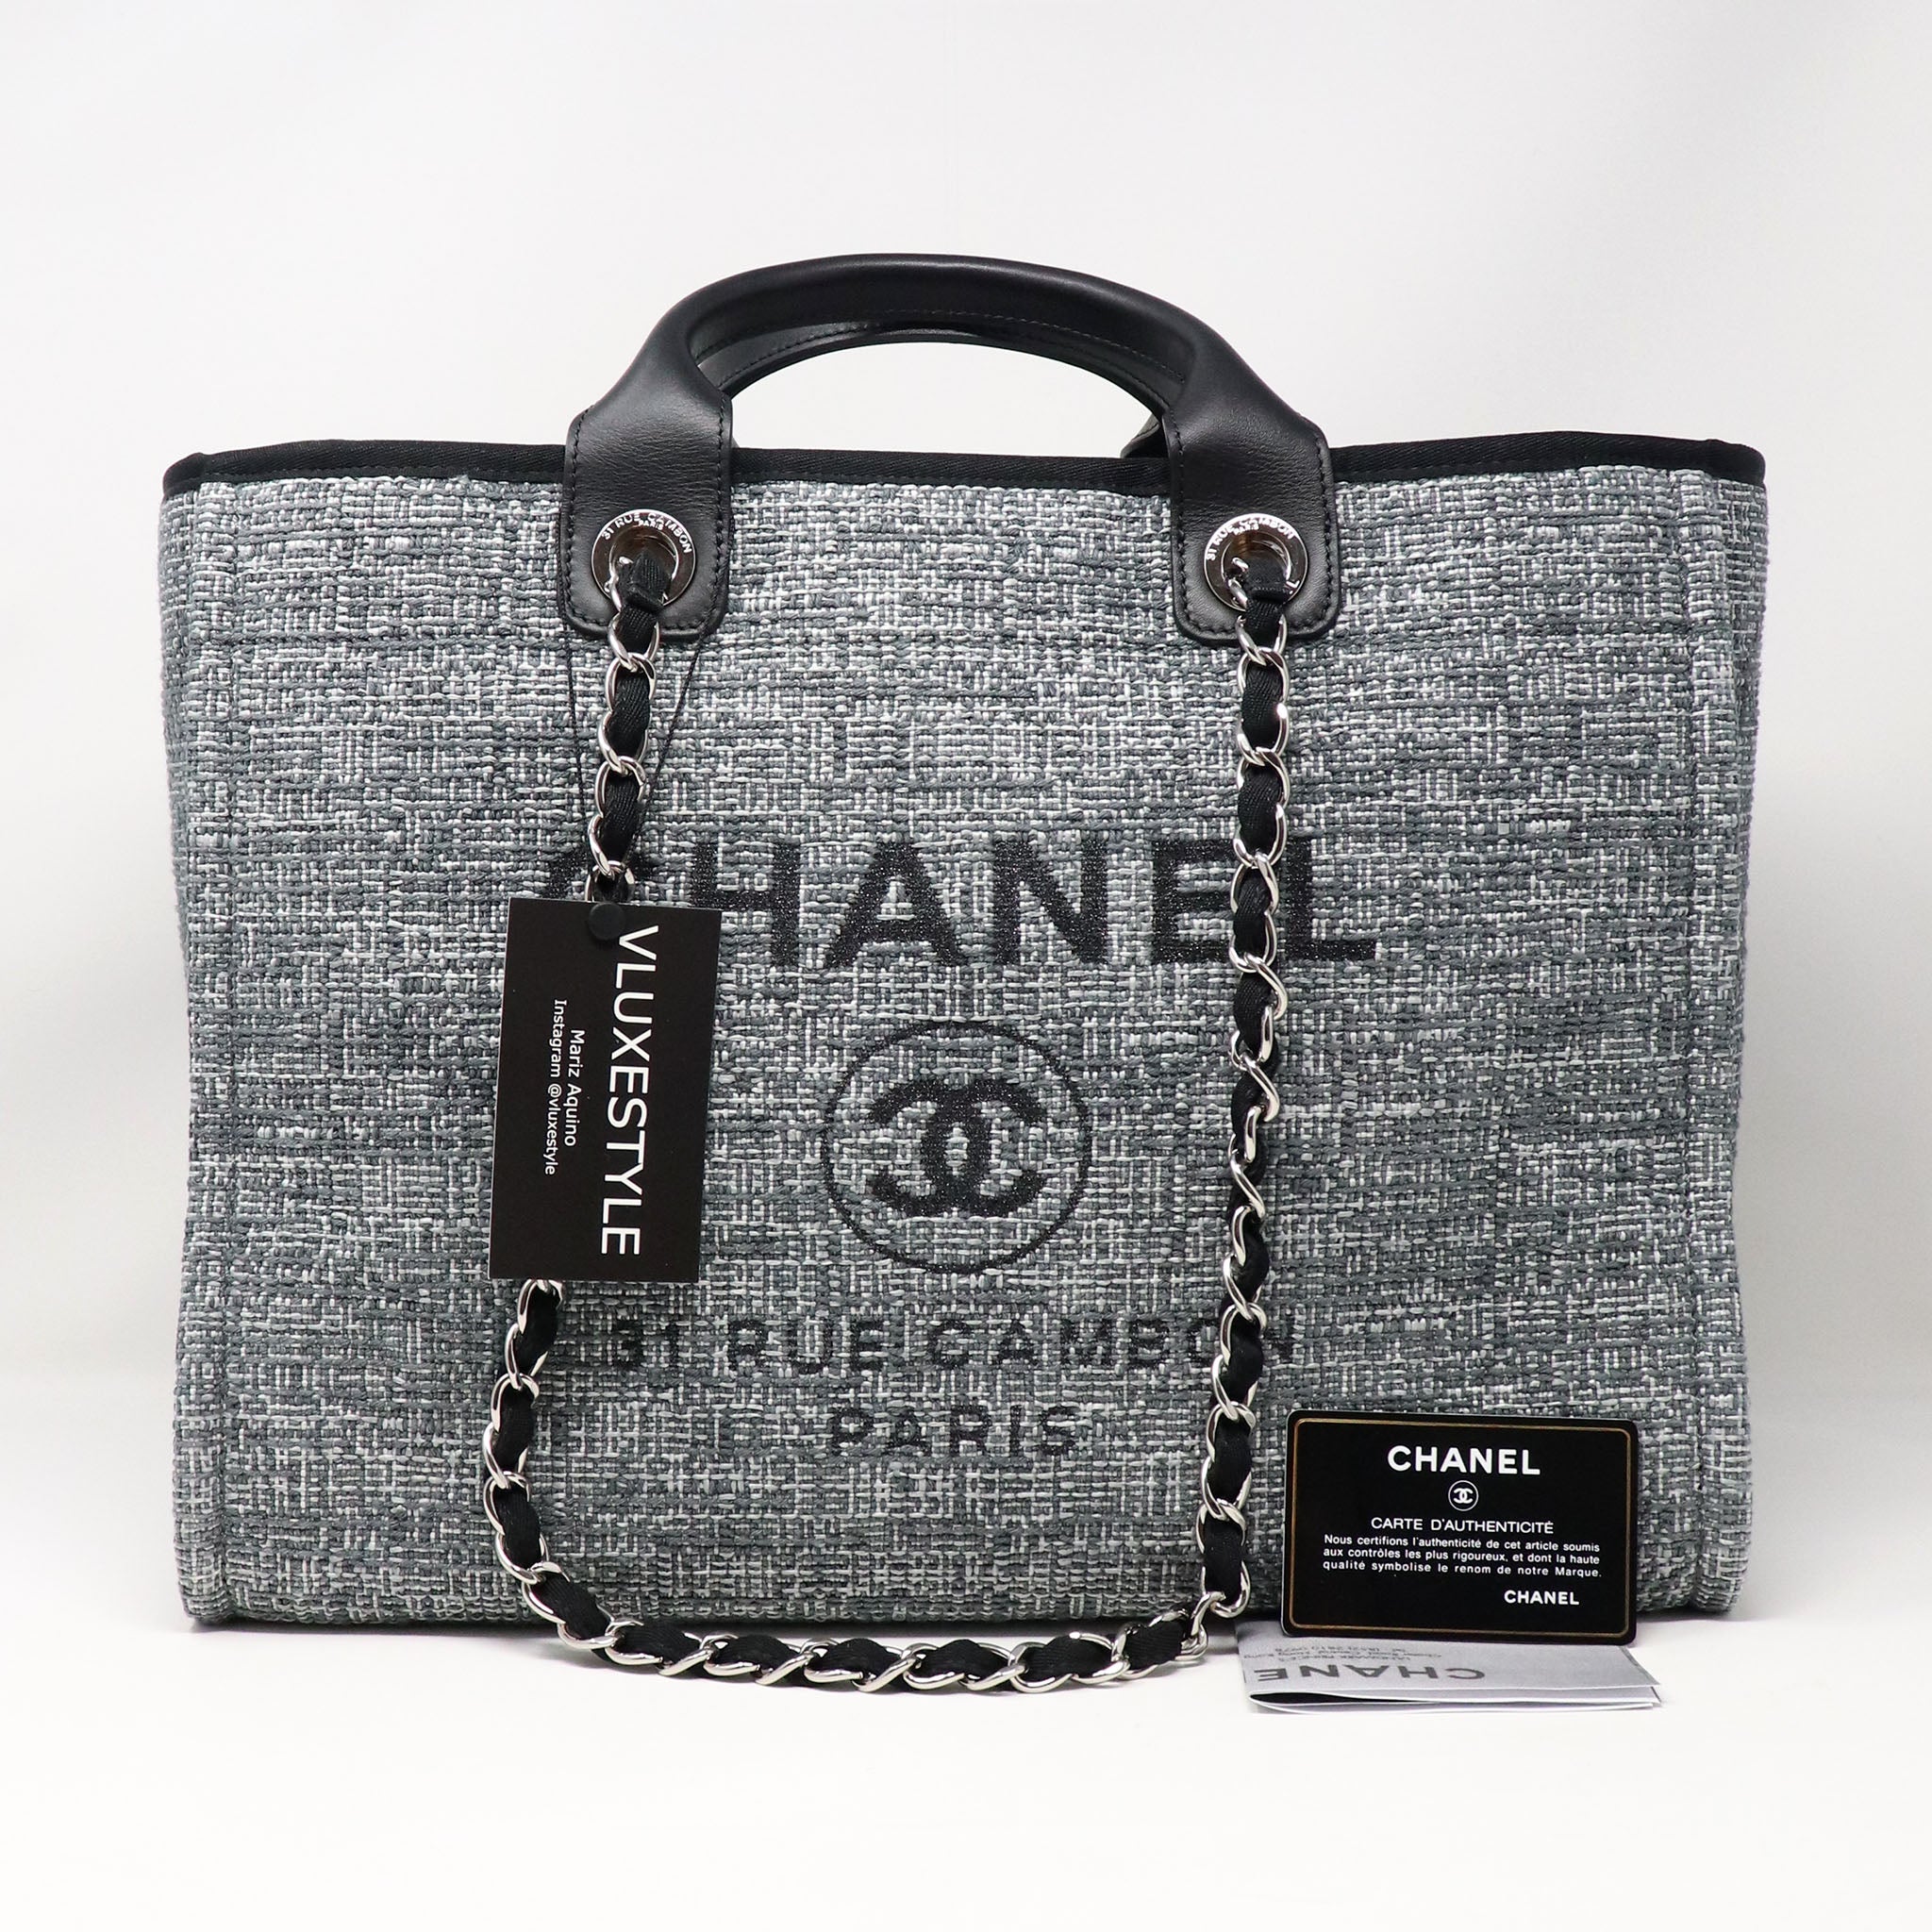 Chanel Black and White Large Deauville of Wool Felt with Silver